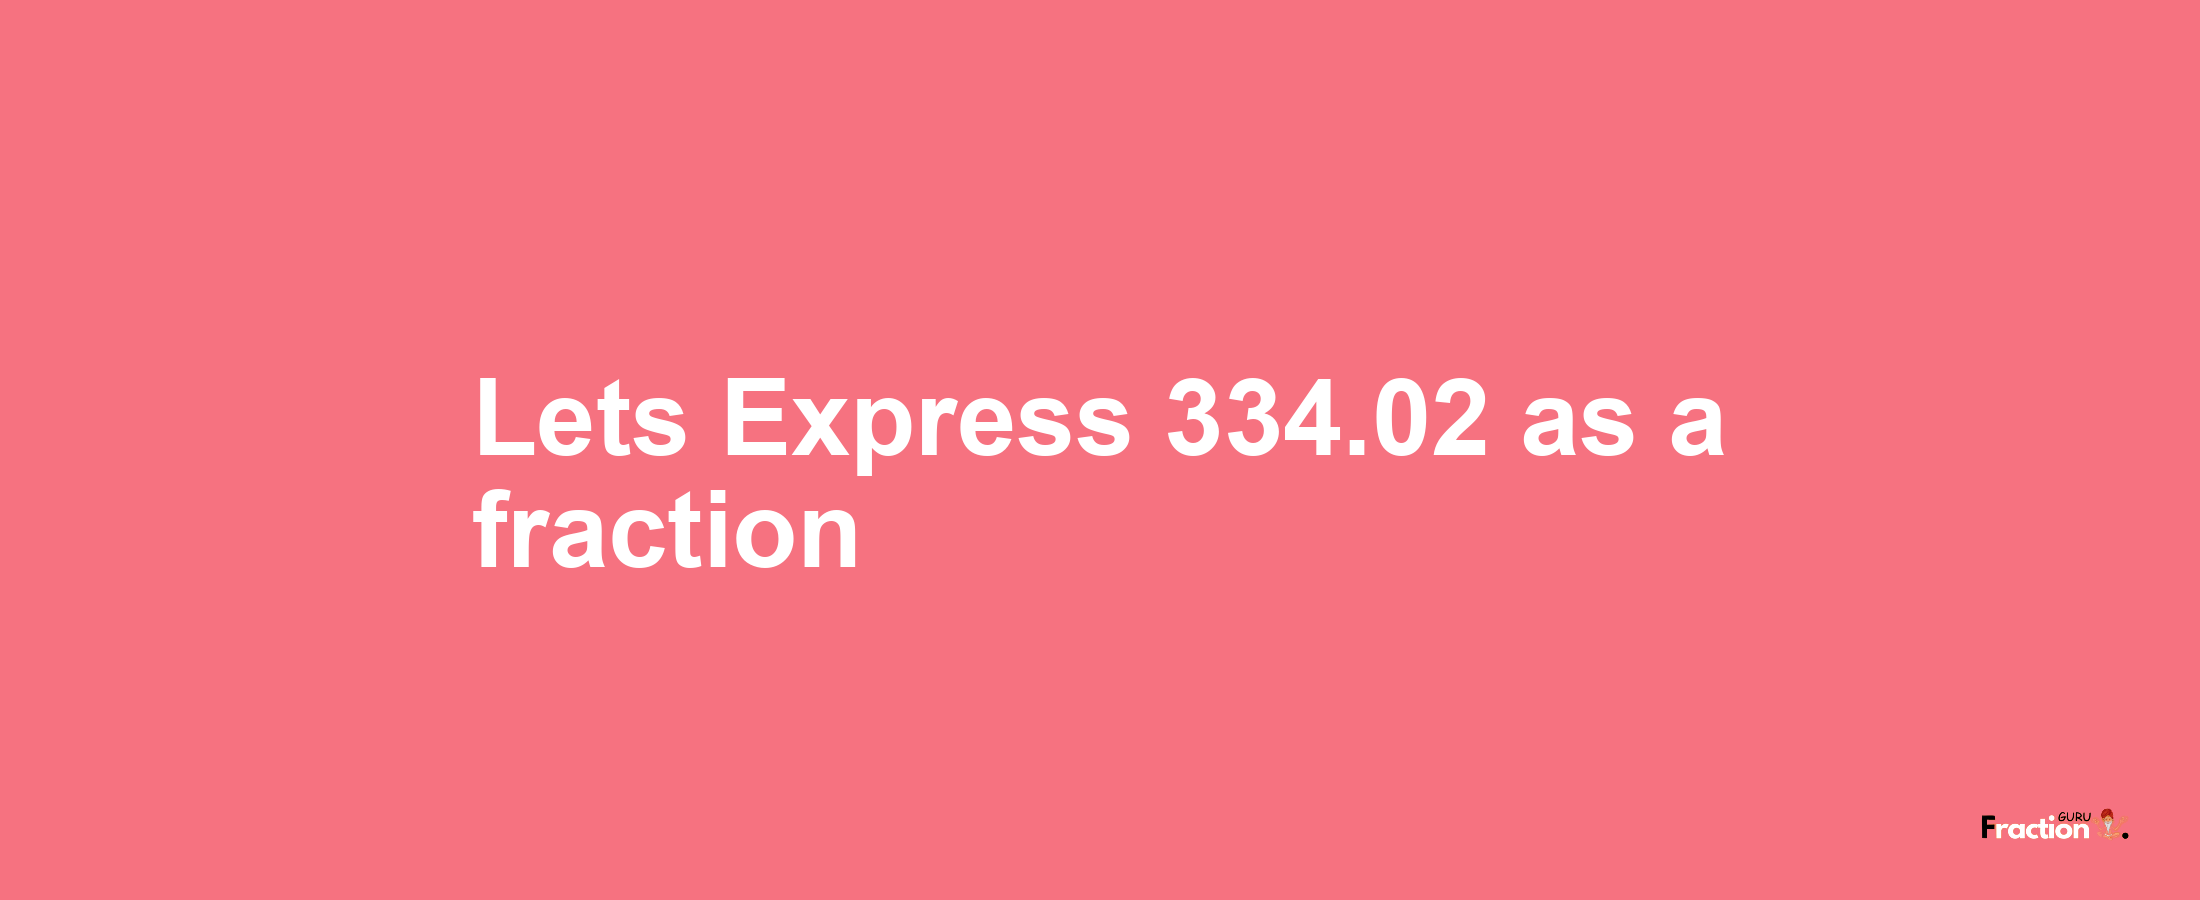 Lets Express 334.02 as afraction